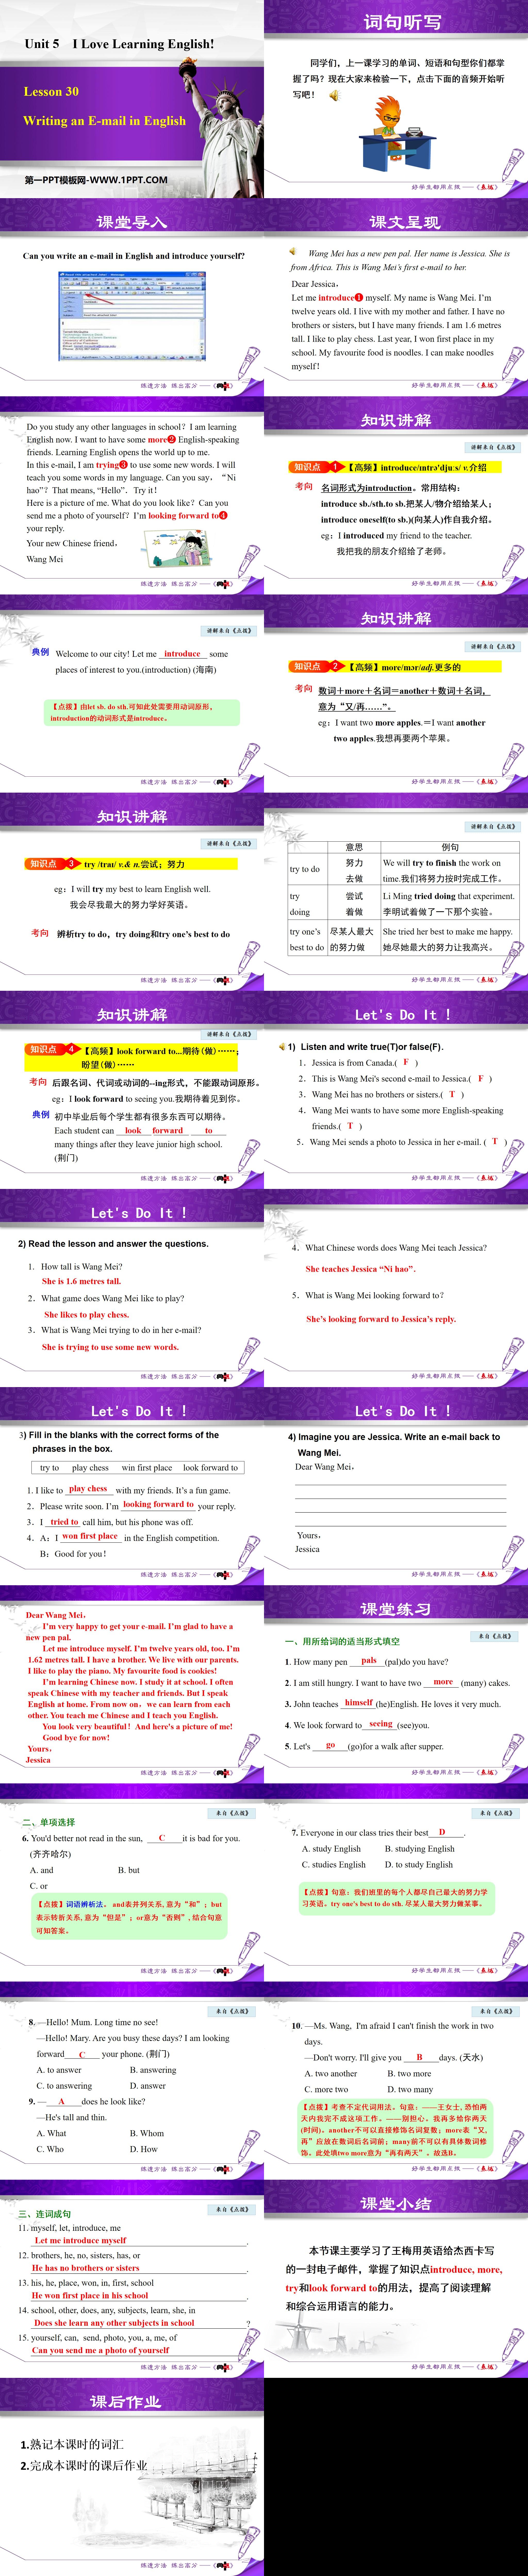 《Writing an E-mail in English》I Love Learning English PPT教学课件
（2）